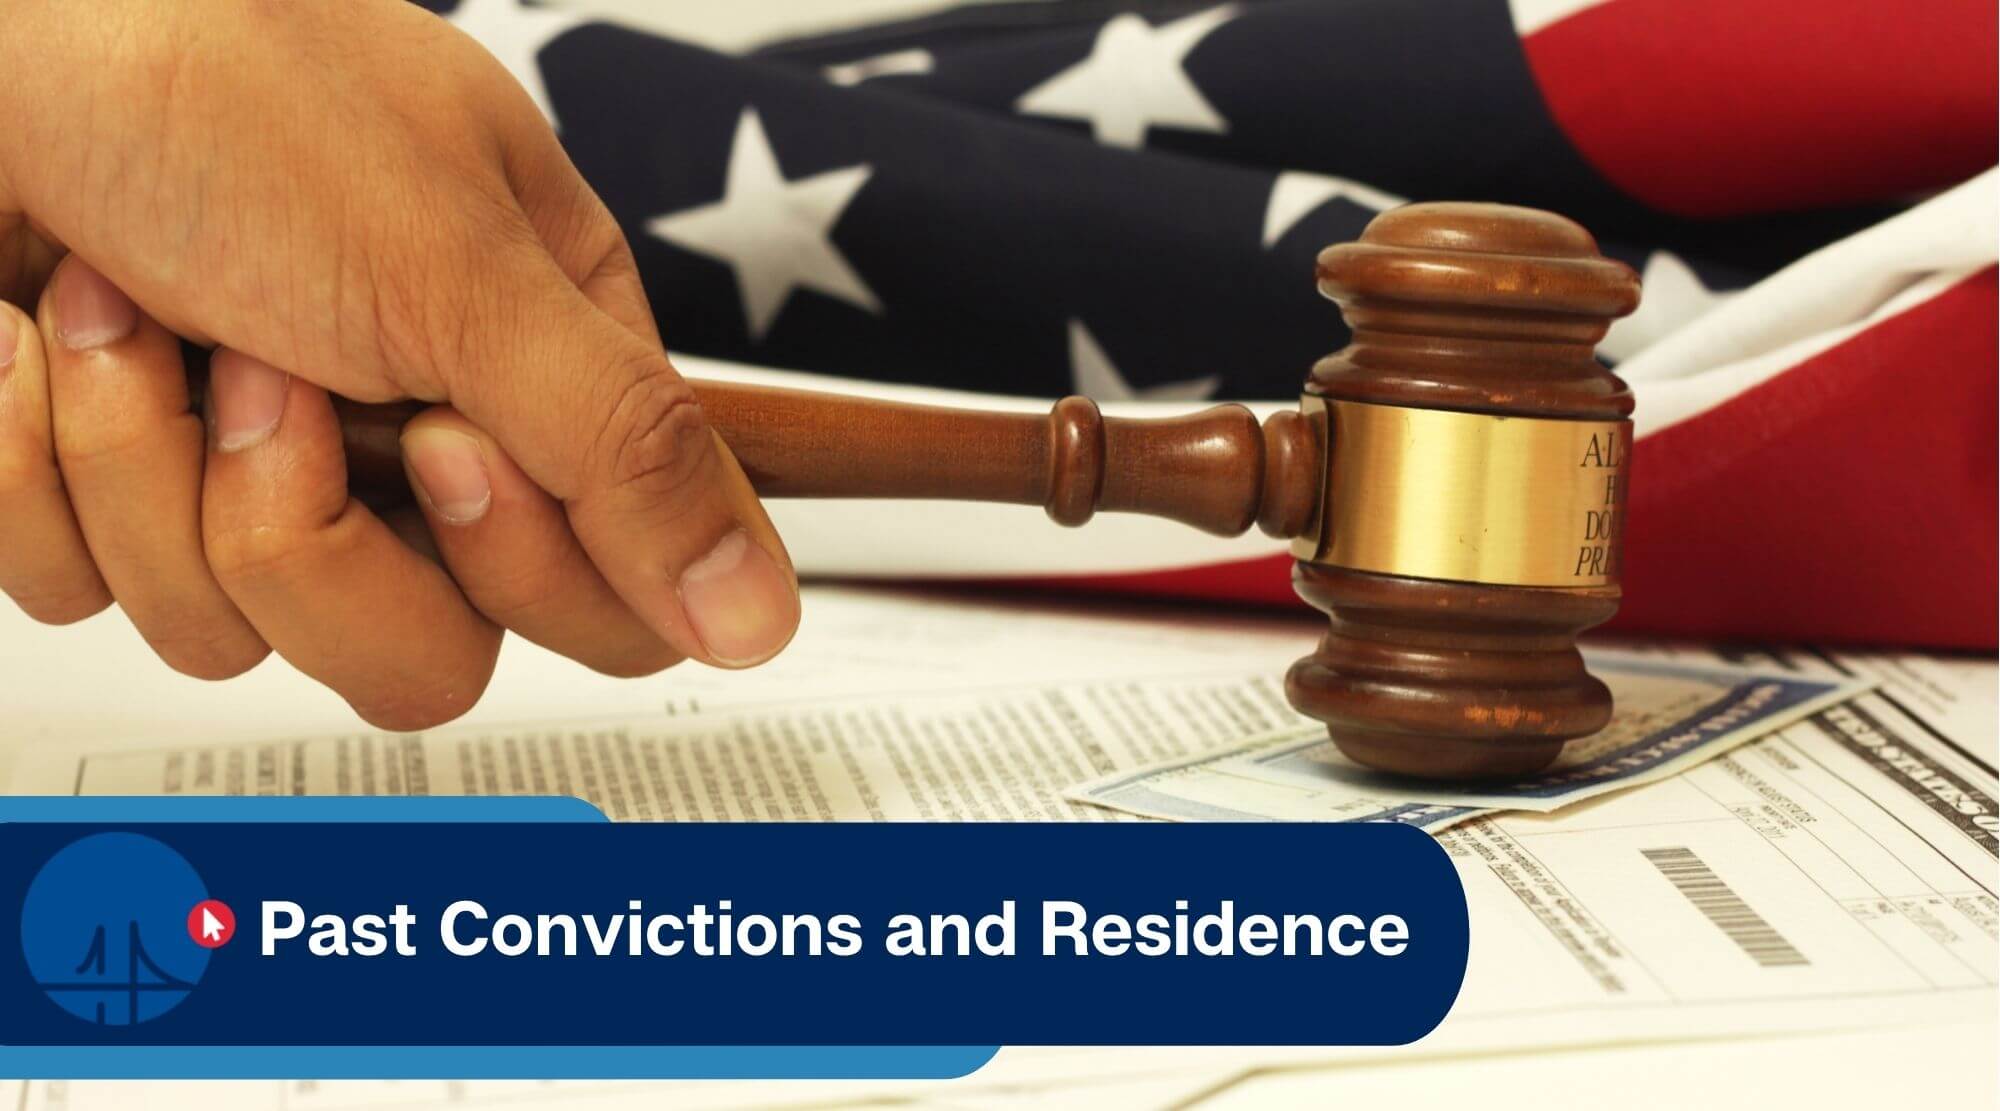 Past convictions and residence